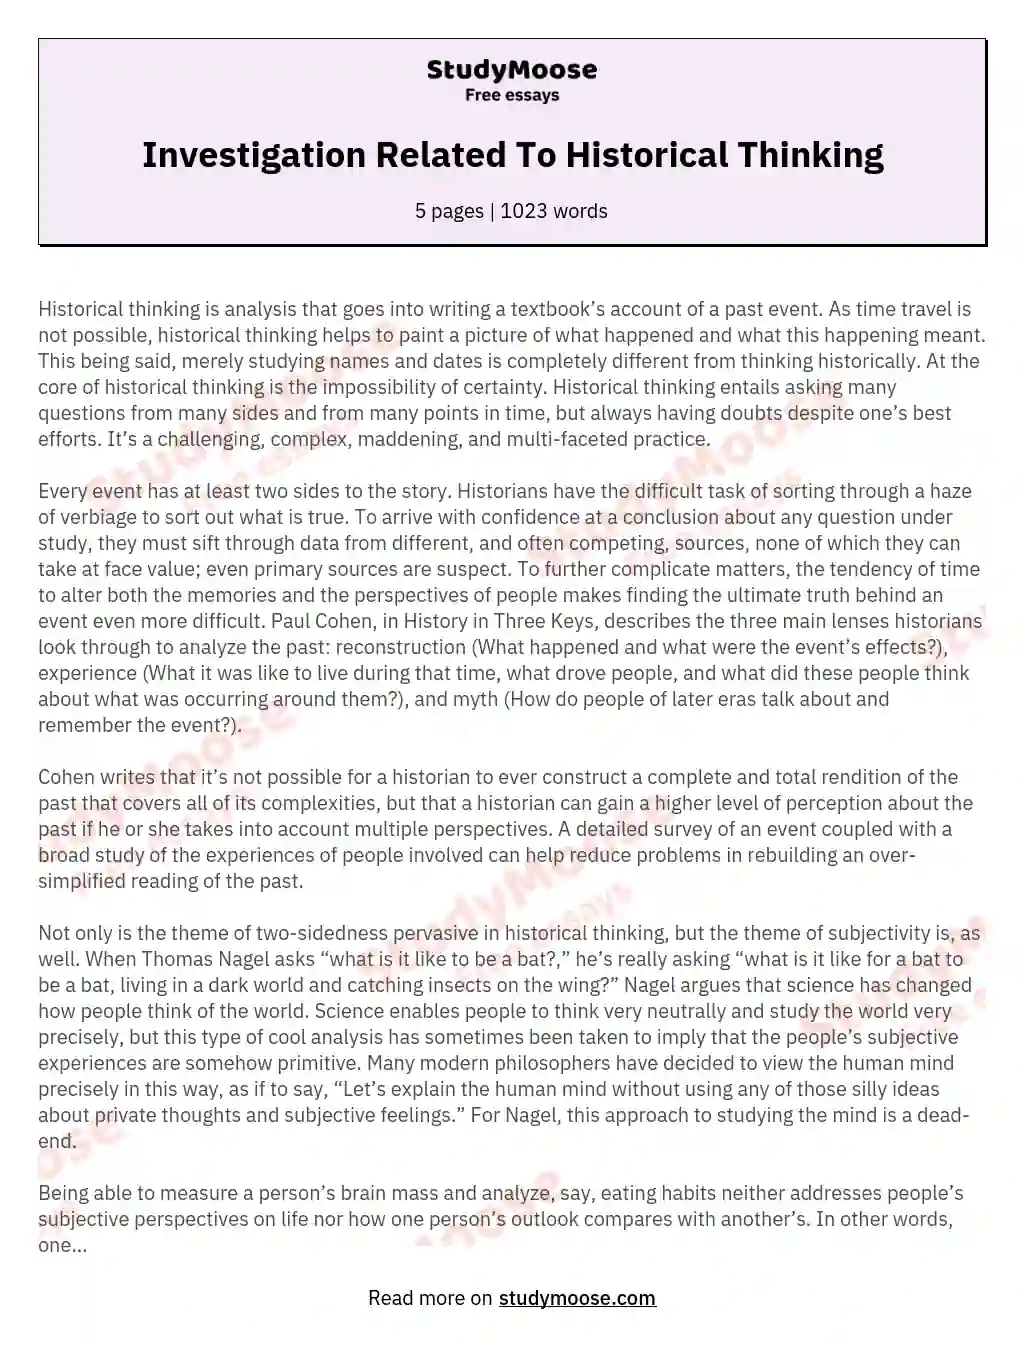 Investigation Related To Historical Thinking essay